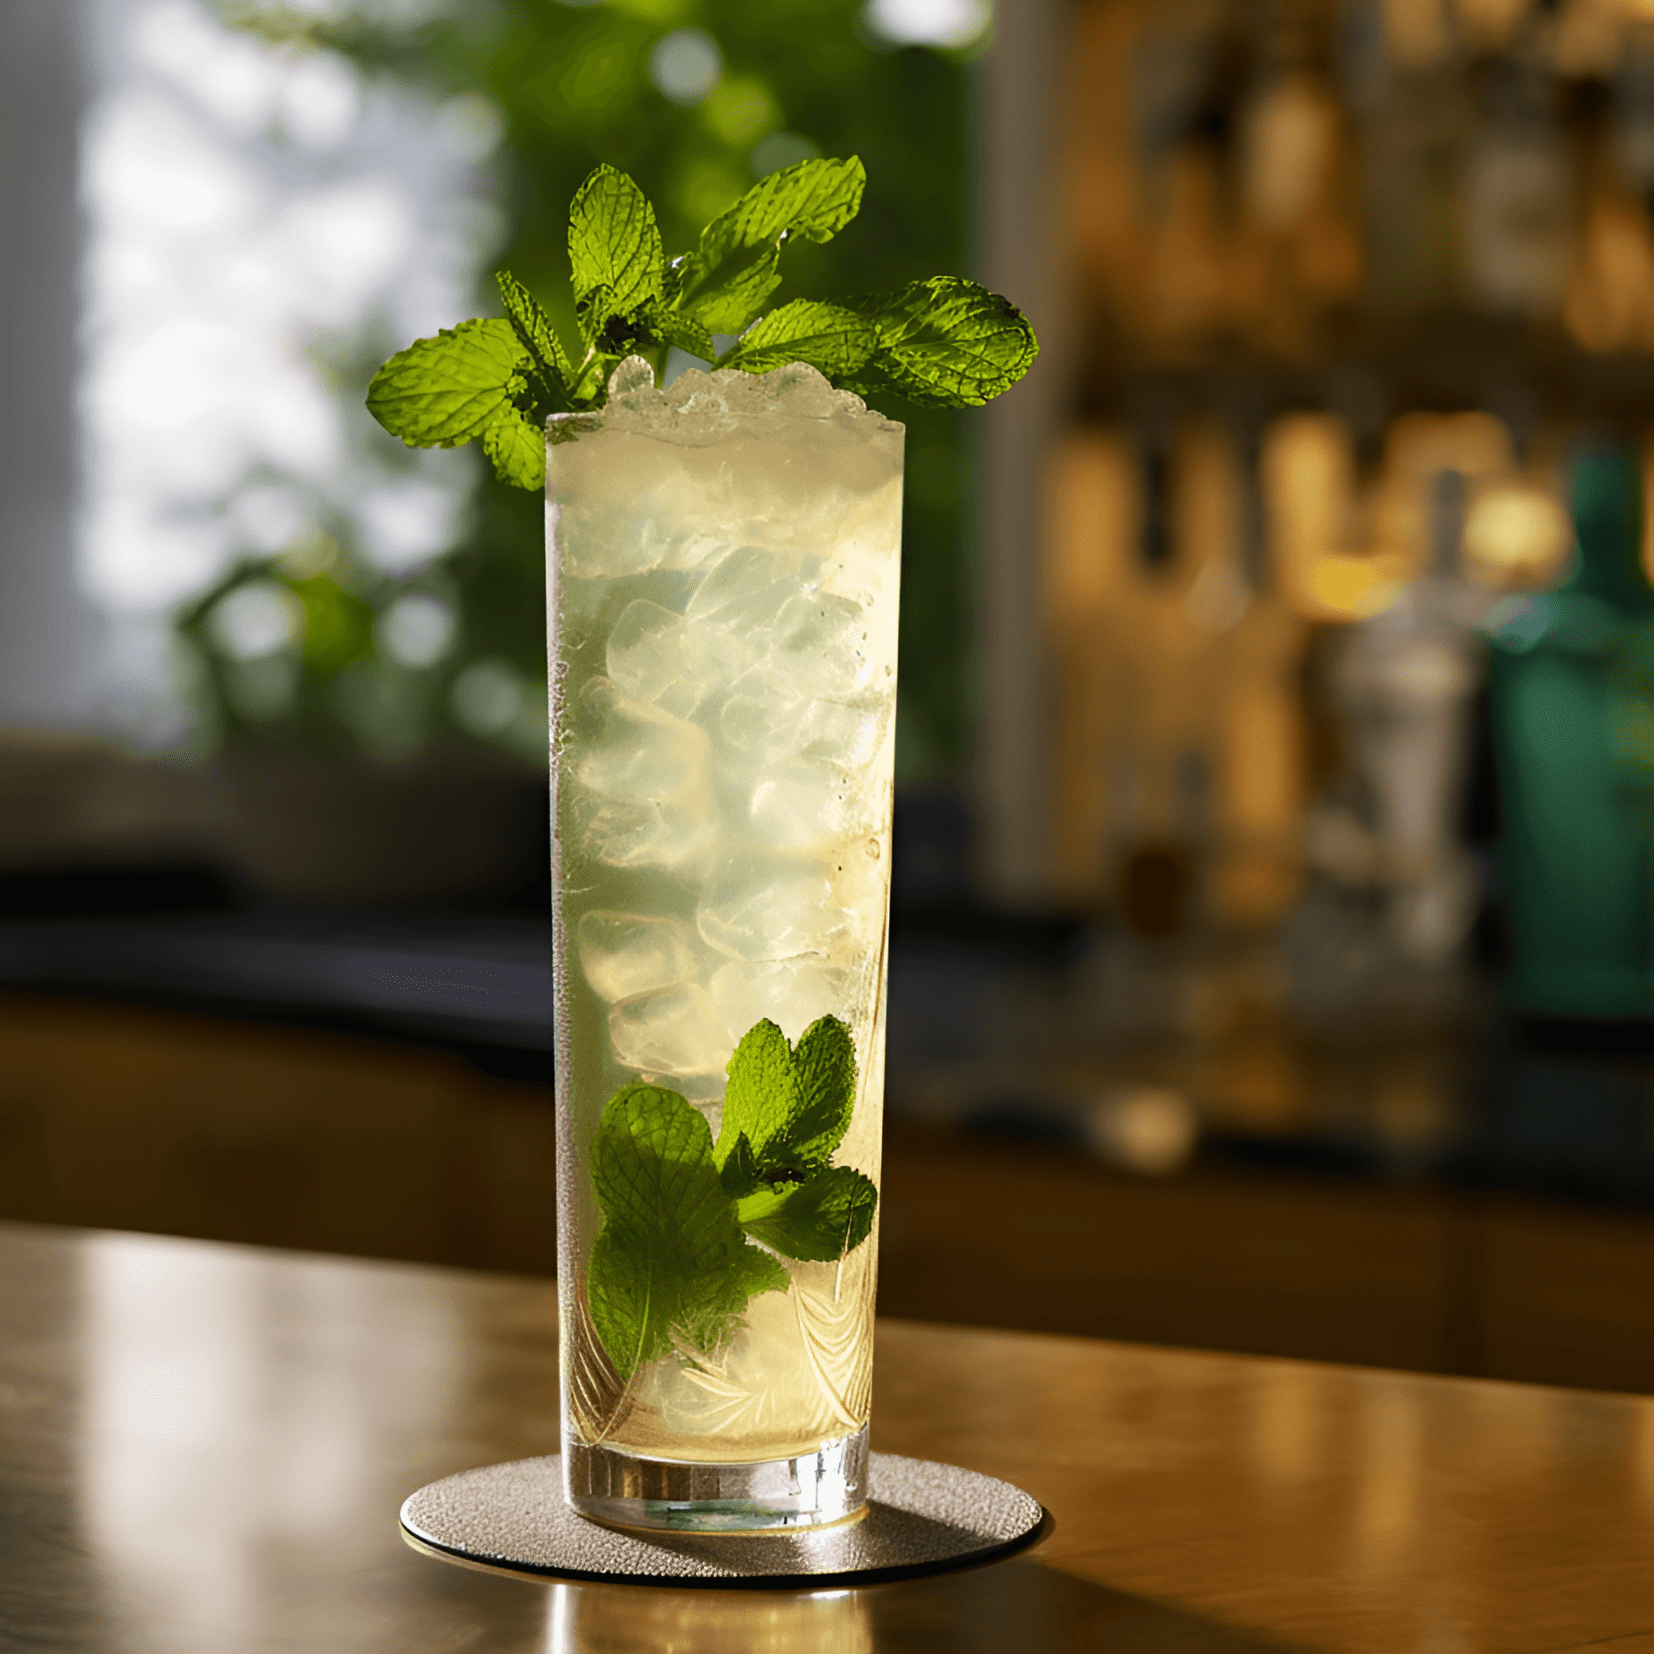 Ginger Rogers Cocktail Recipe - The Ginger Rogers cocktail offers a refreshing, slightly spicy, and subtly sweet taste. The combination of ginger and mint creates a unique and invigorating flavor, while the gin and lemon juice add a touch of tartness and complexity.